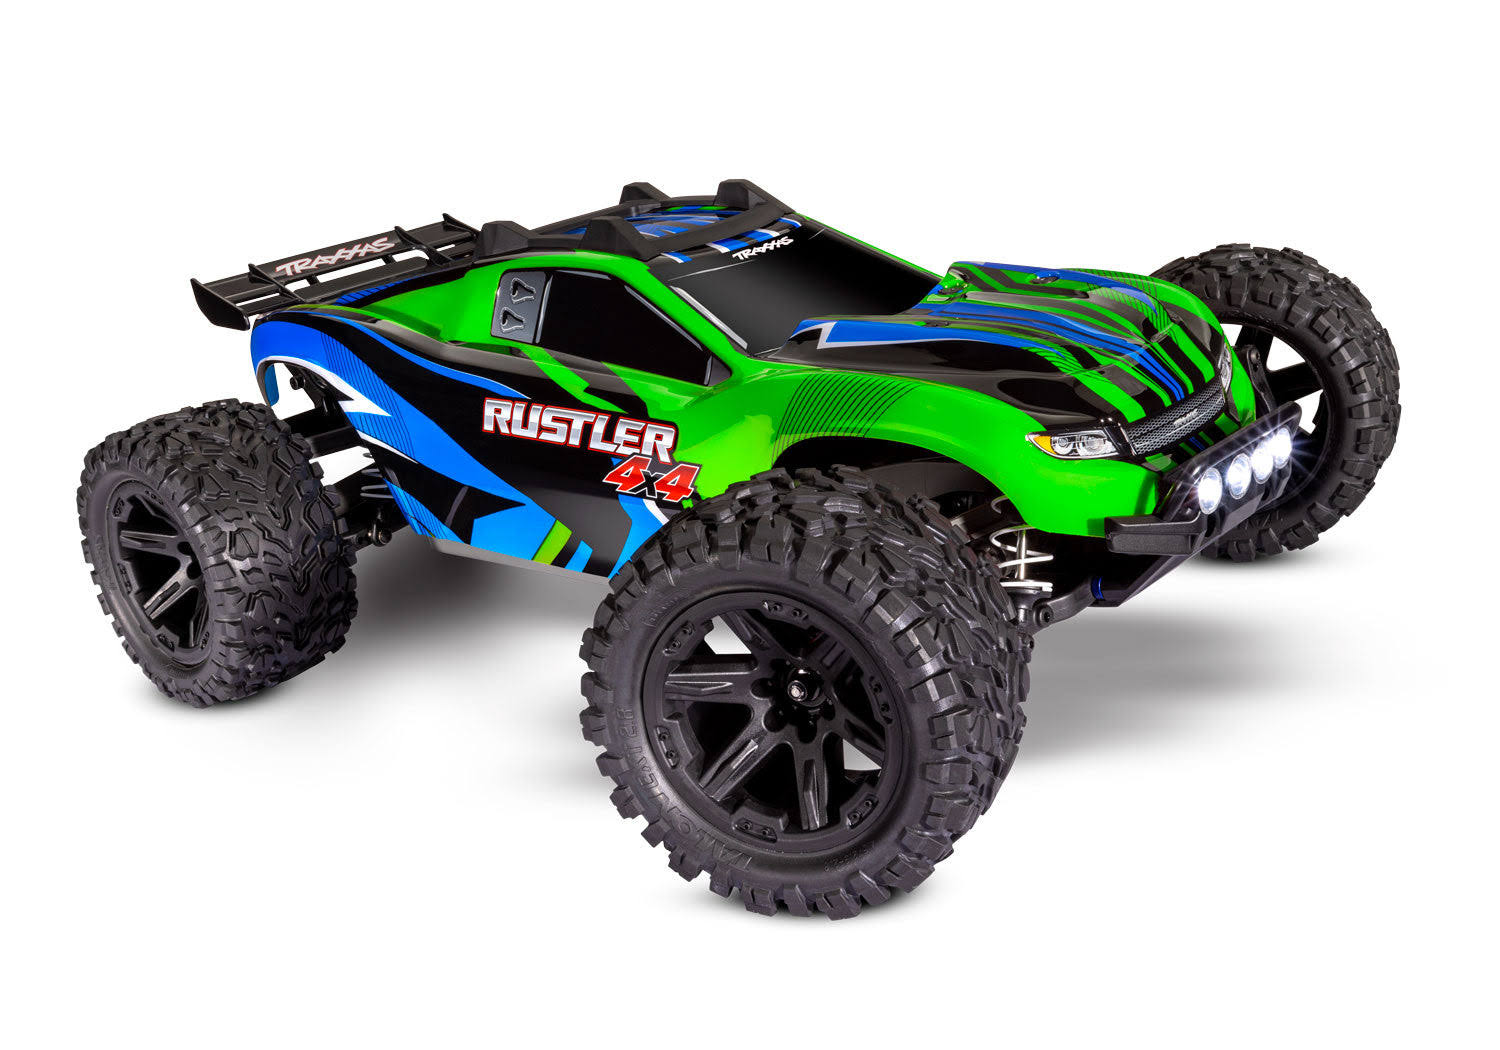 Traxxas Rustler 4x4 1/10 Stadium Truck RTR TQ - LED - with Battery & Charger (Green)